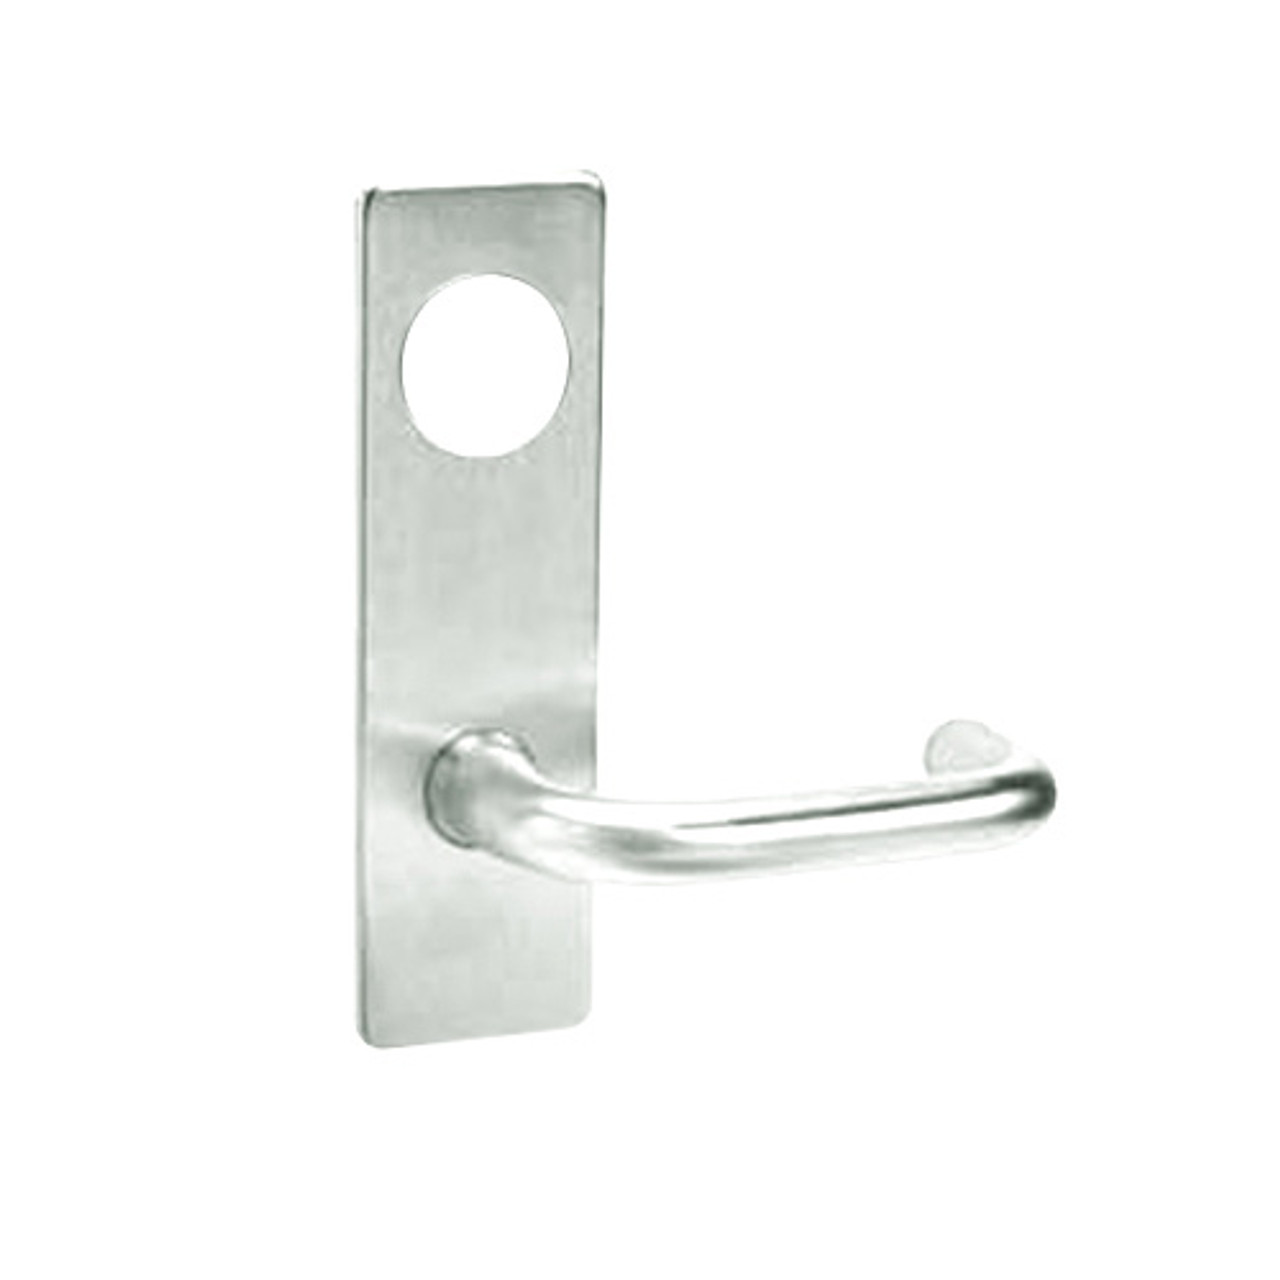 ML2092-LWP-618 Corbin Russwin ML2000 Series Mortise Security Institution or Utility Locksets with Lustra Lever with Deadbolt in Bright Nickel